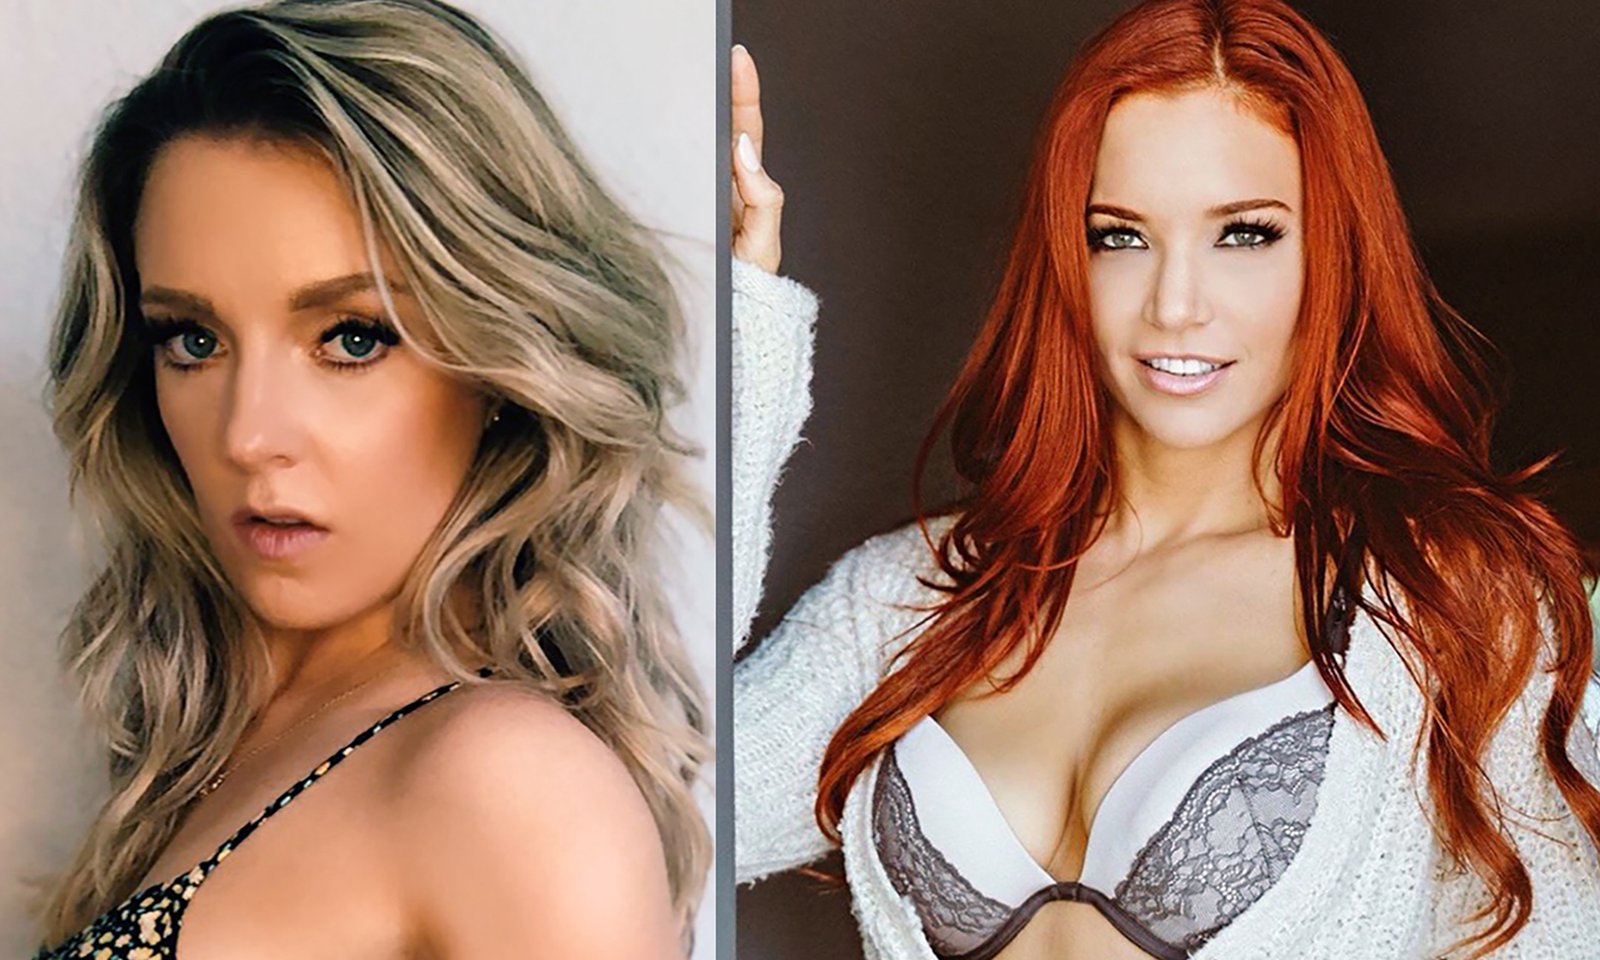 Kate Kennedy, Jayden Cole On Surviving In Adult During Pandemic